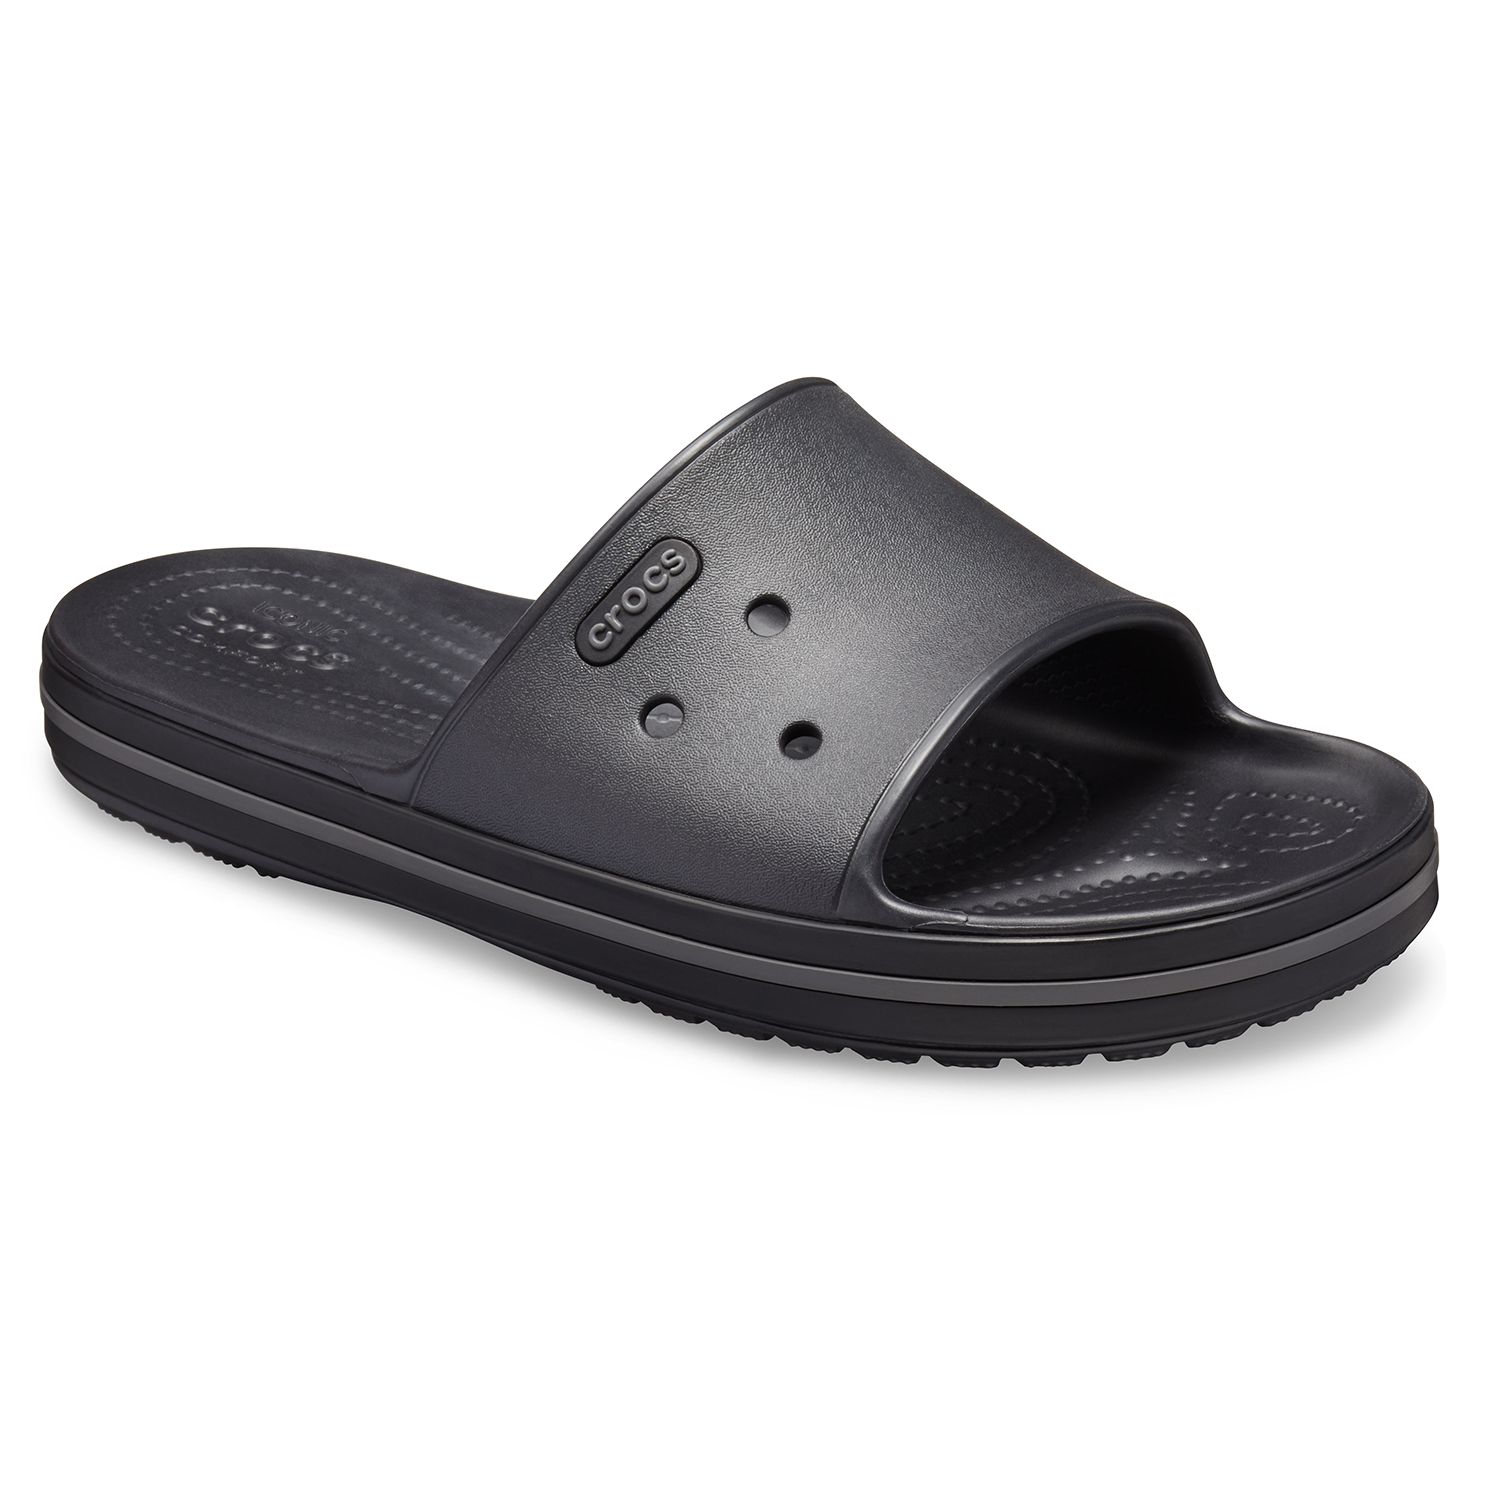 places to get sandals near me